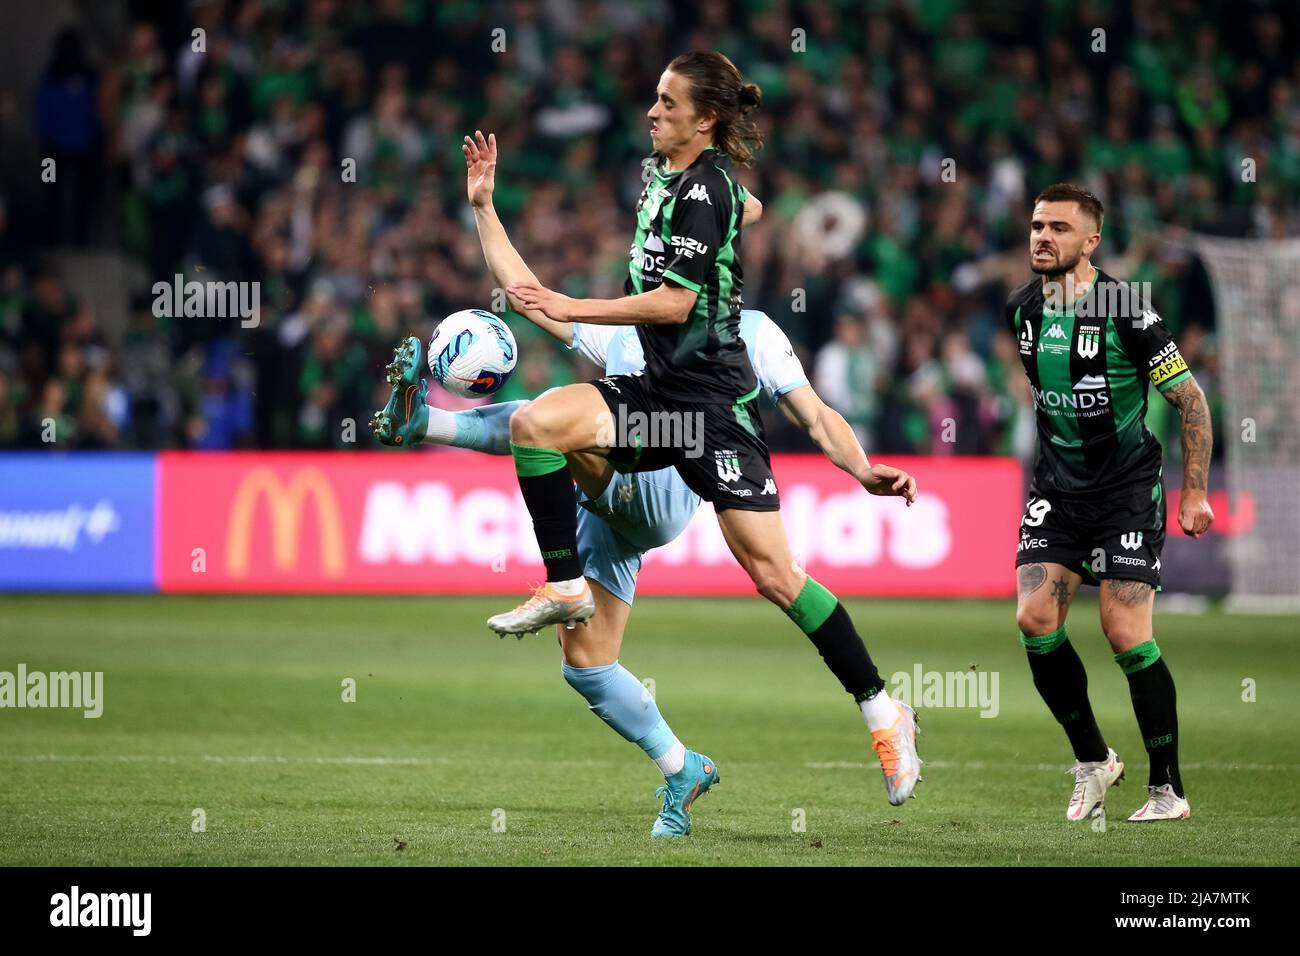 Melbourne, Australia, 28 May, 2022. Lachlan Wales of Western United goes for the ball during the A-League Grand Final soccer match between Melbourne City FC and Western United at AAMI Park on May 28, 2022 in Melbourne, Australia. Credit: Dave Hewison/Speed Media/Alamy Live News Stock Photo